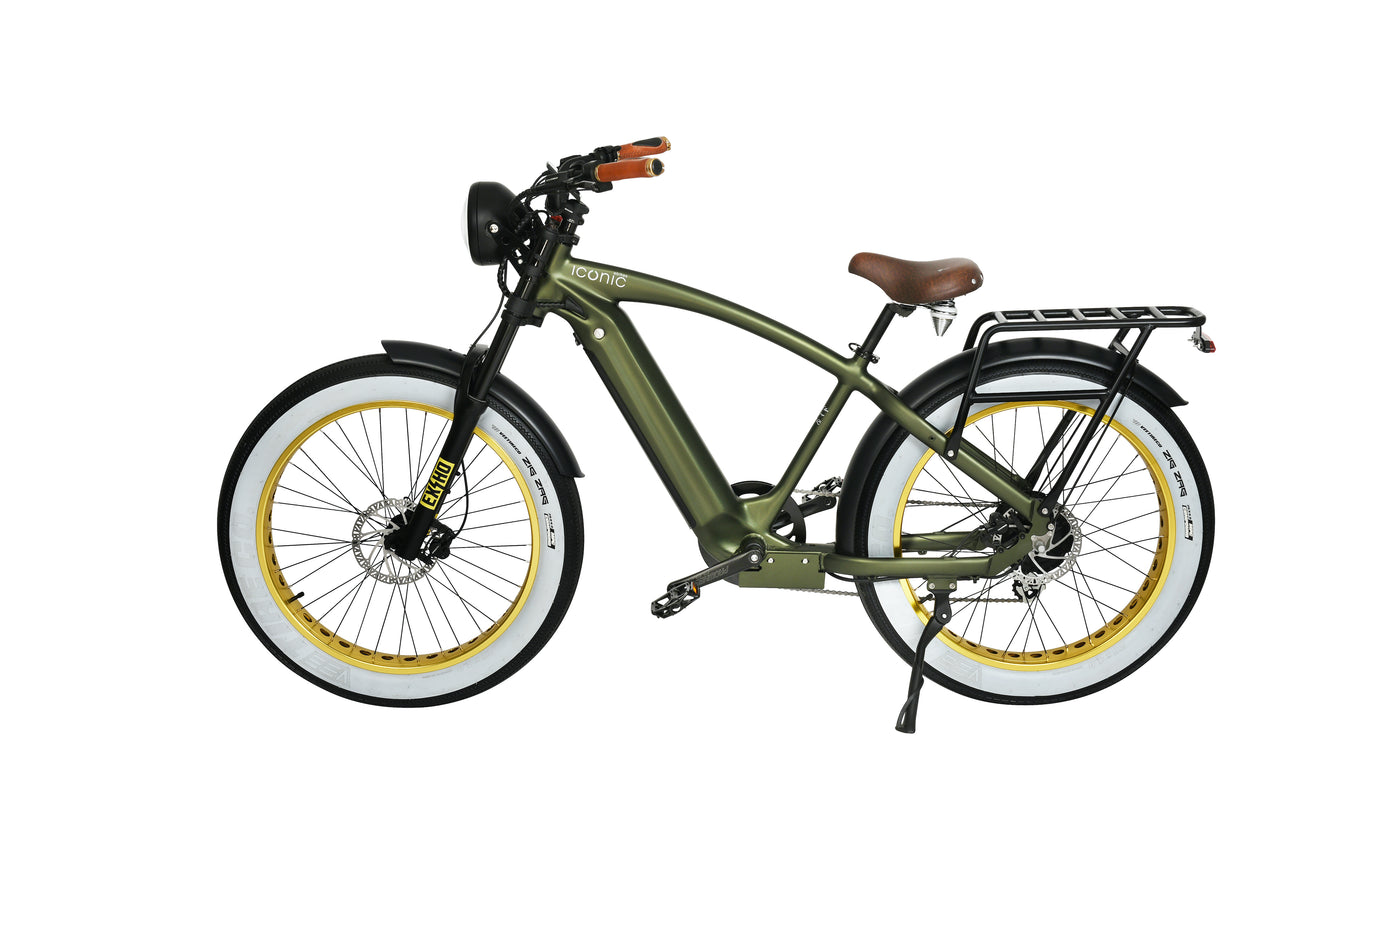 Iconic Electric ebike left side view